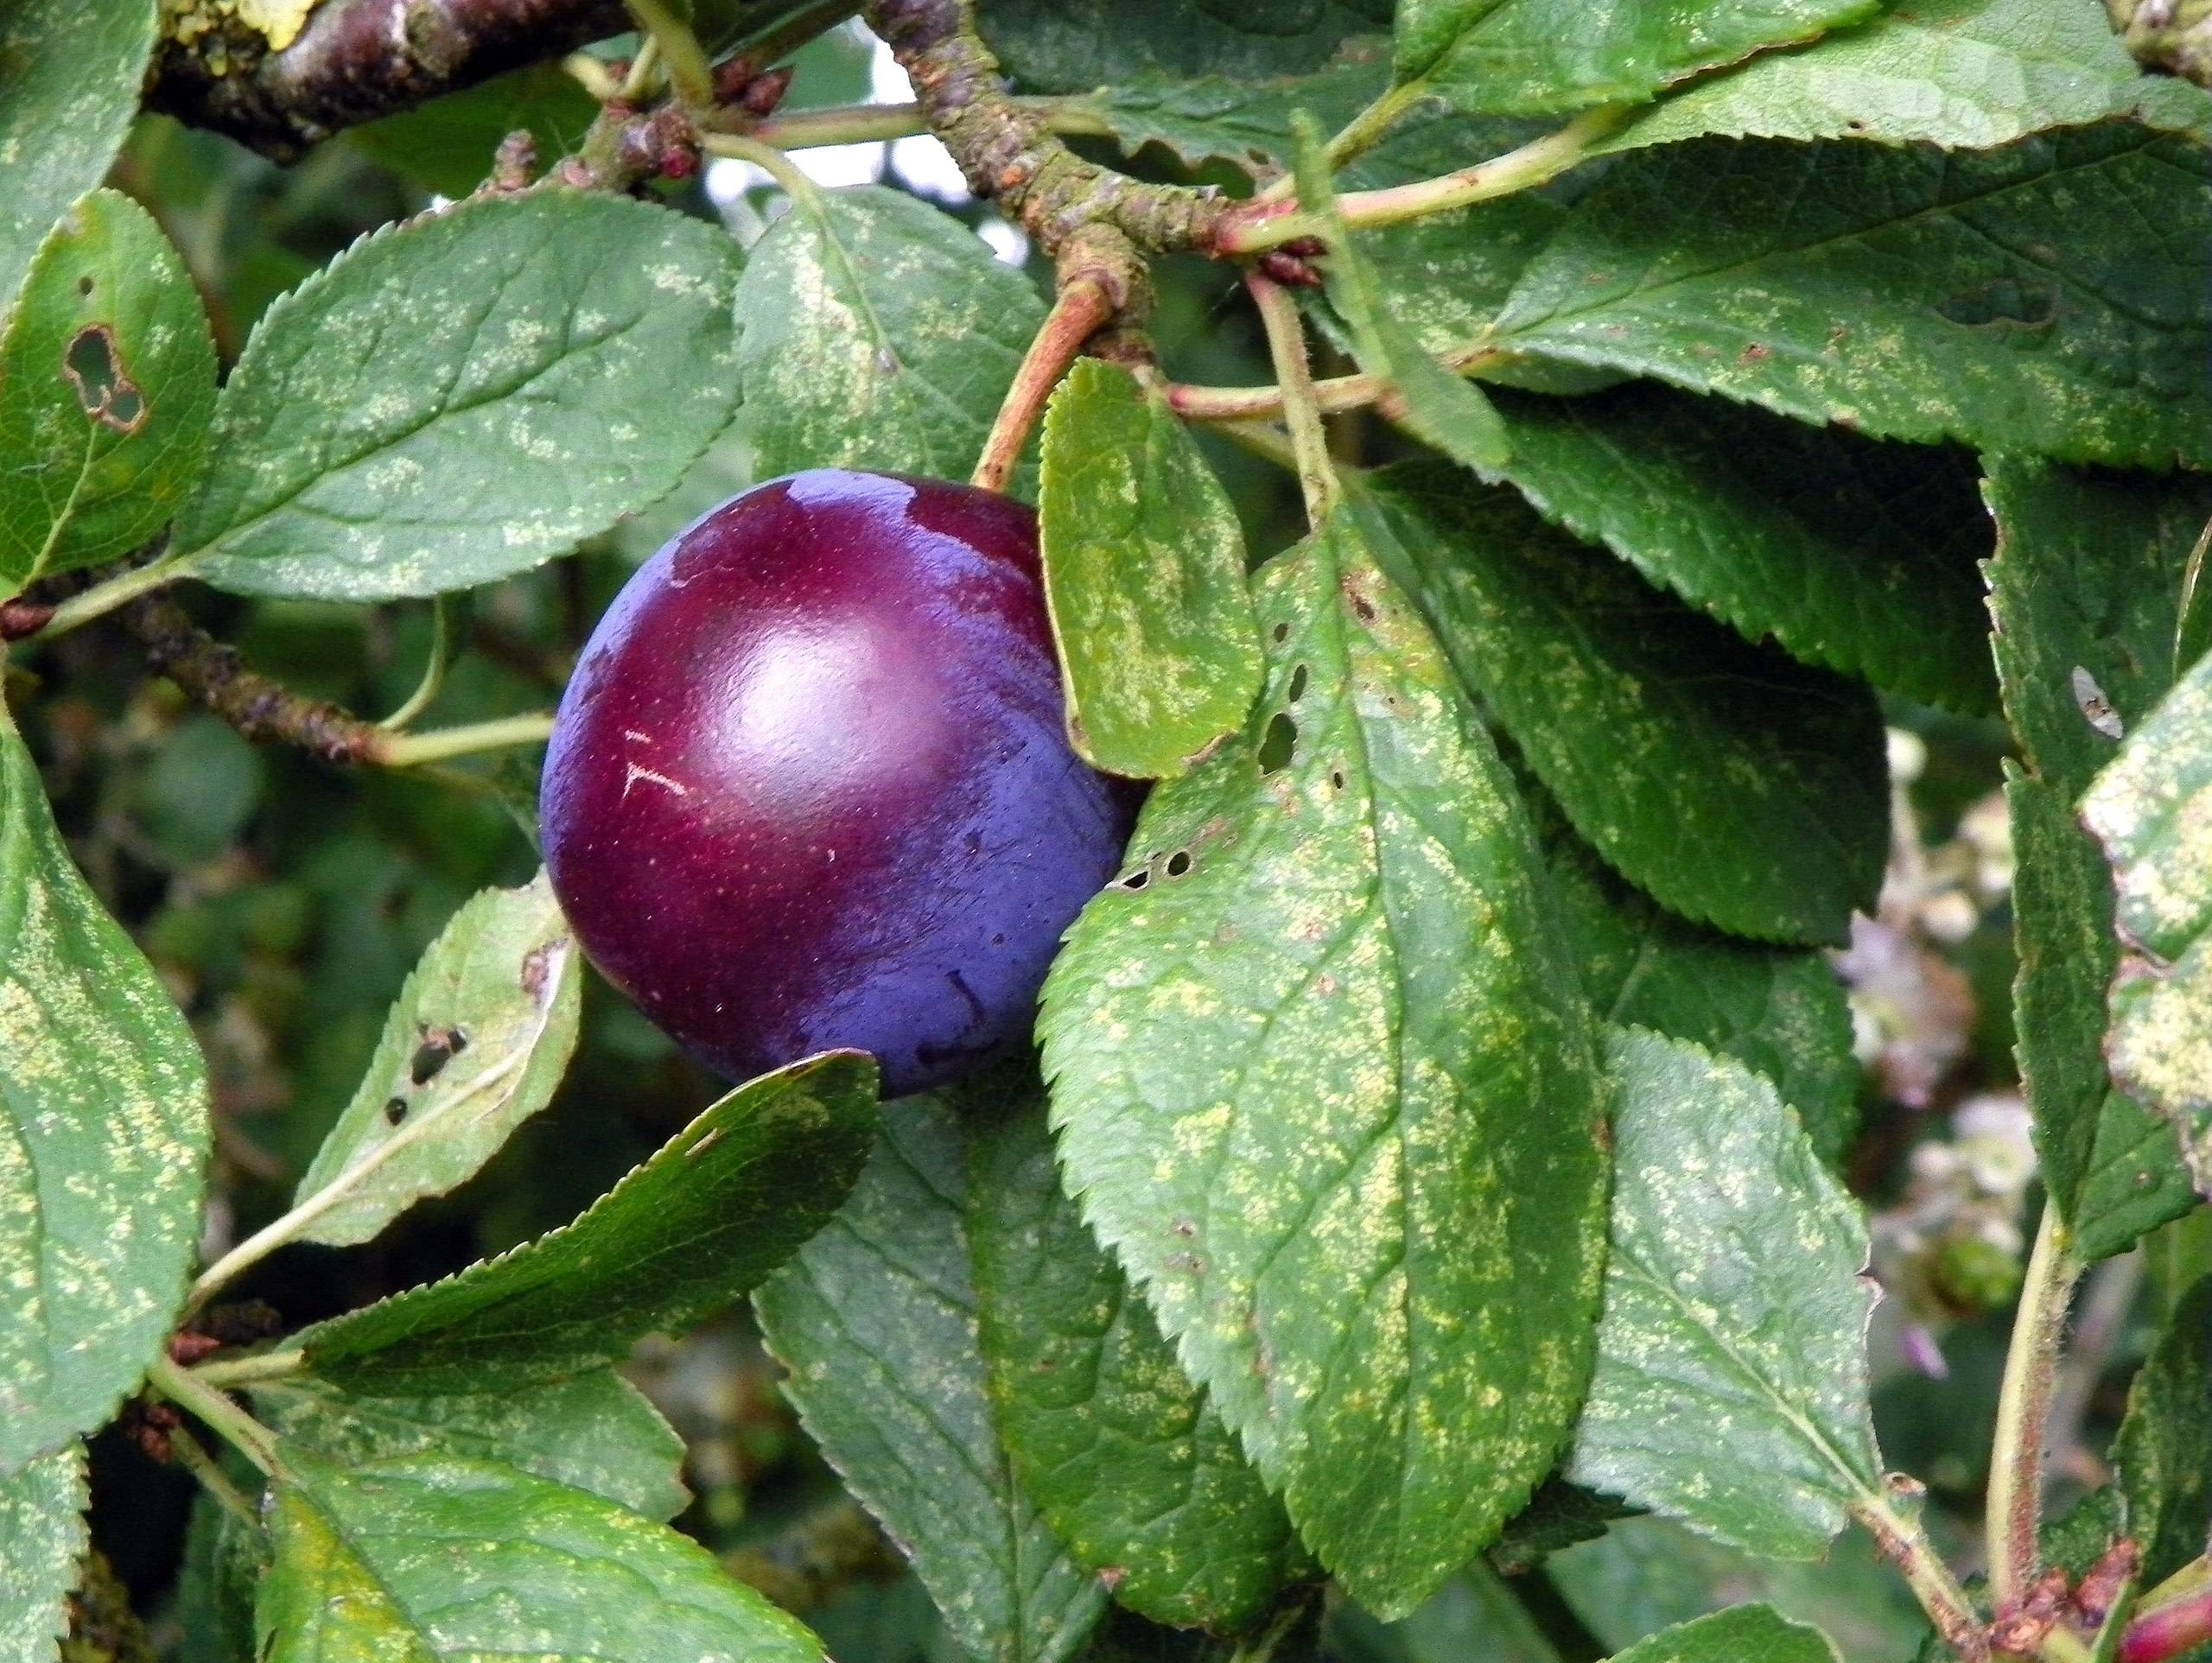 purple-burgundy fruit with yellow-green leaves on brown-yellow branches